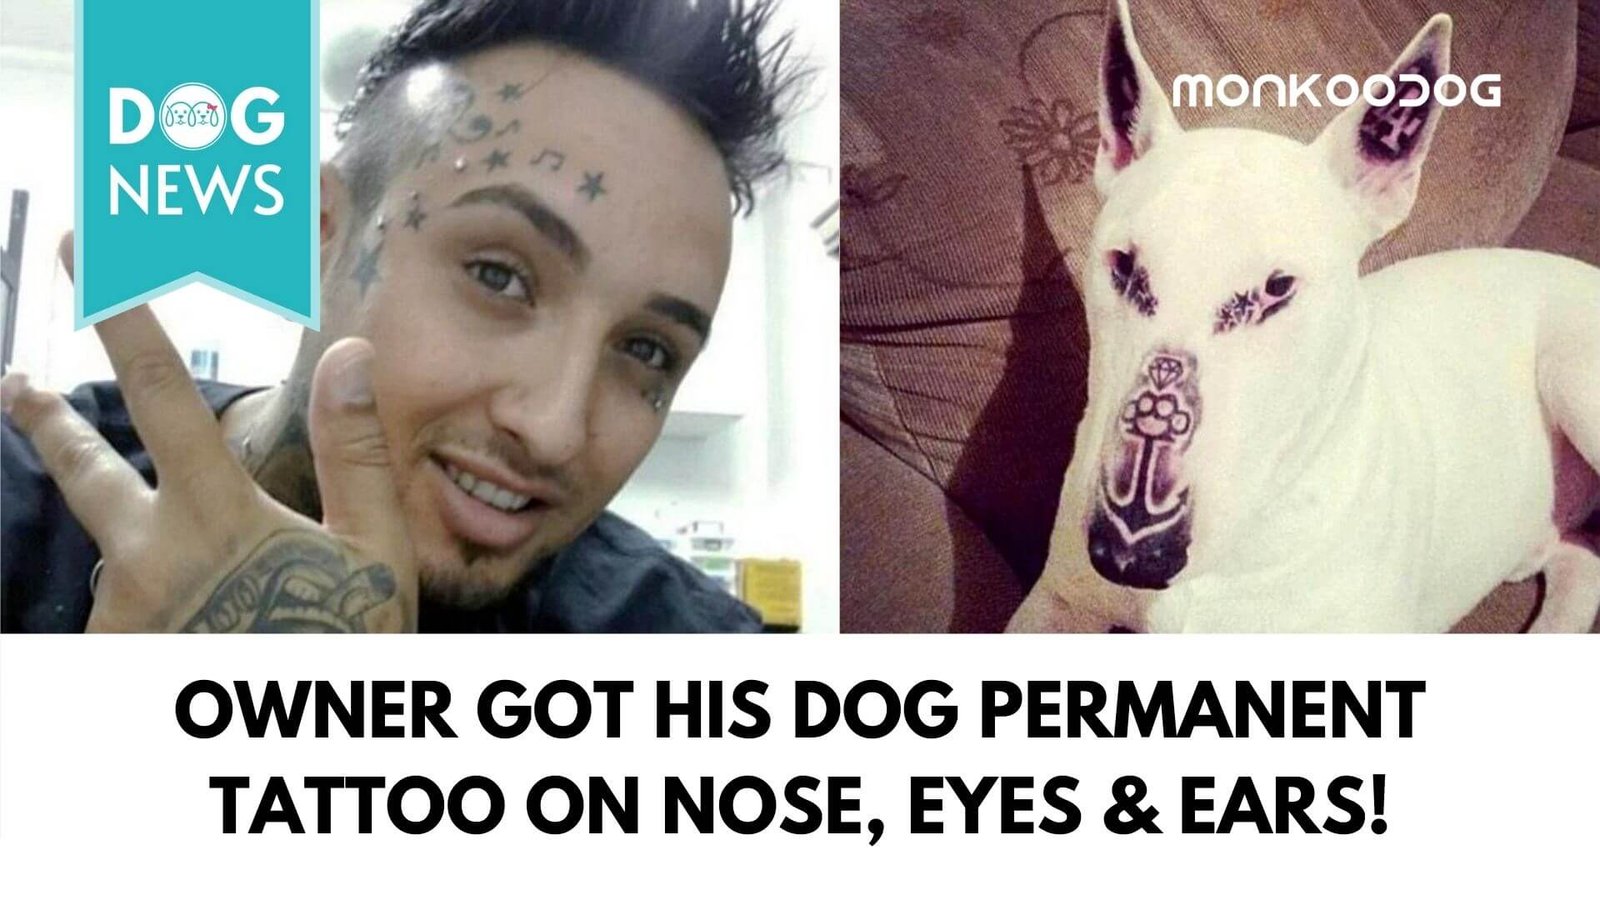 Pet Lovers Worldwide Show Anger And Concern After Photos of a Dog with Tattoos Goes Viral